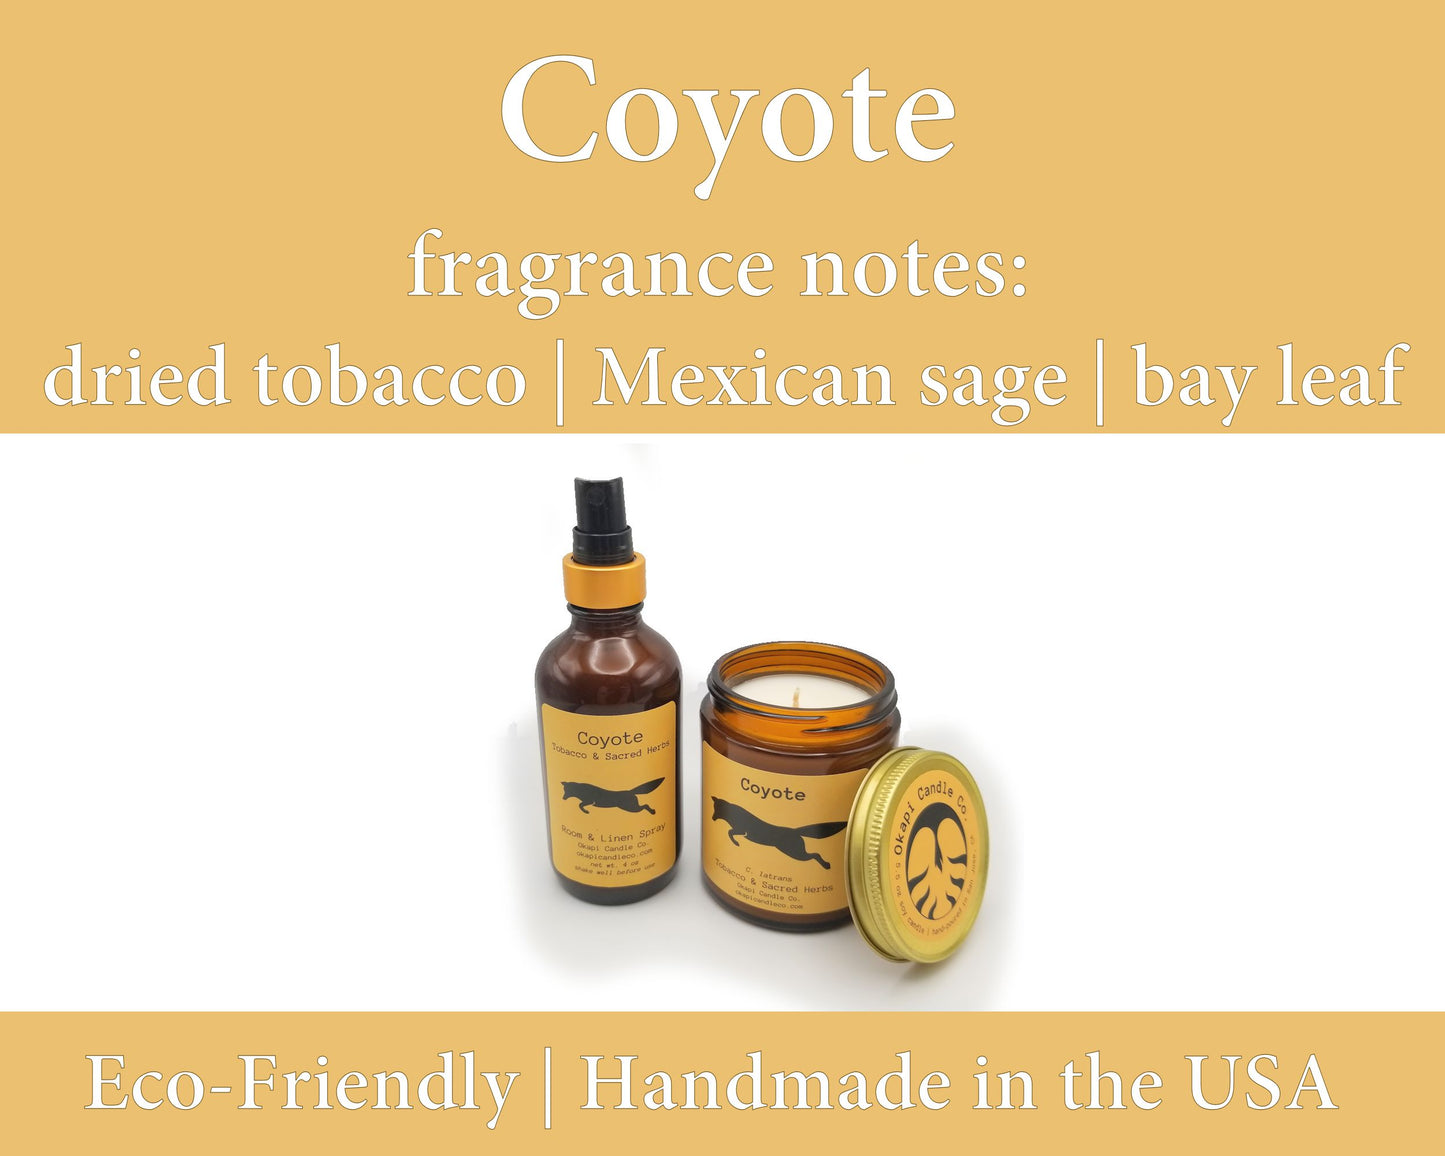 Coyote Room & Linen Spray - Tobacco and Sacred Herbs Fragrance